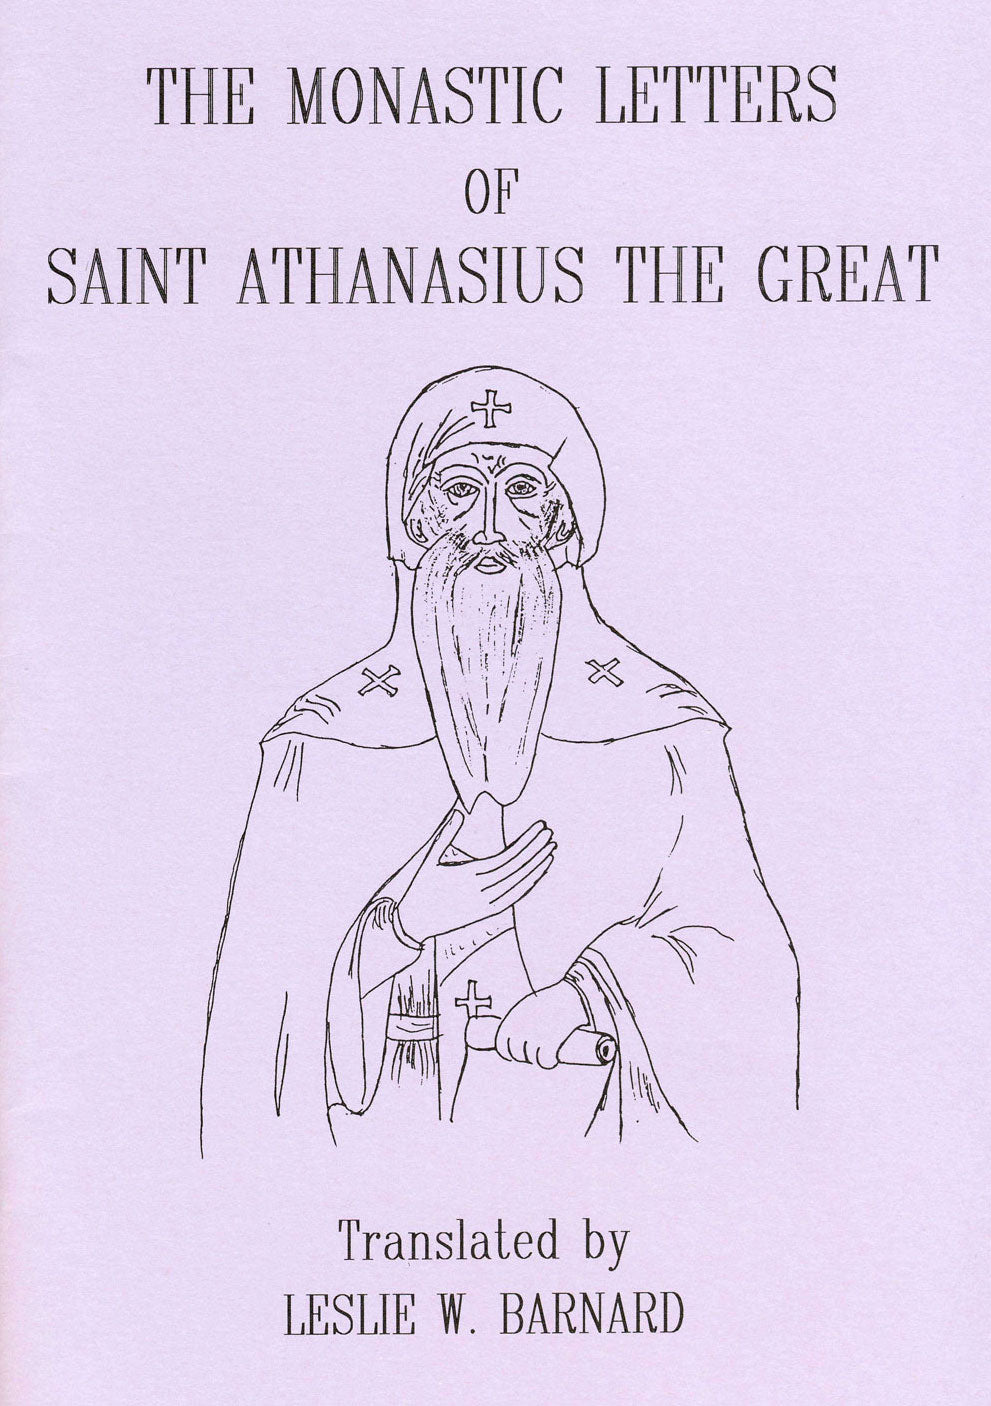 The Monastic Letters of Saint Athanasius the Great - Holy Cross Monastery